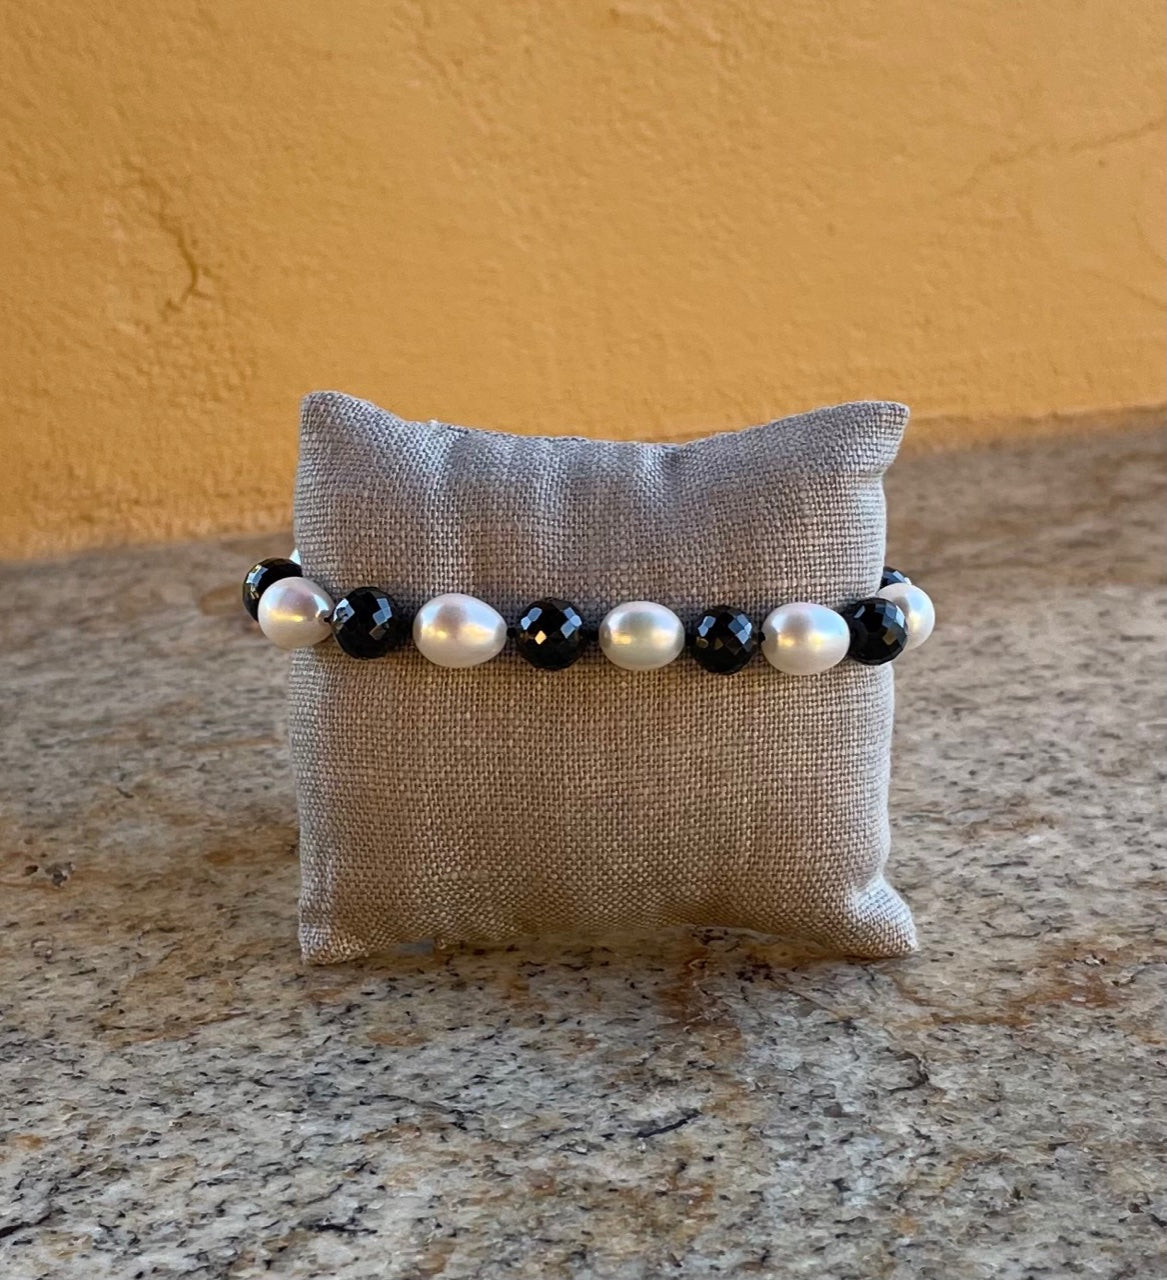 Bracelet - Black spinel - knotted, round and faceted with white rice pearls